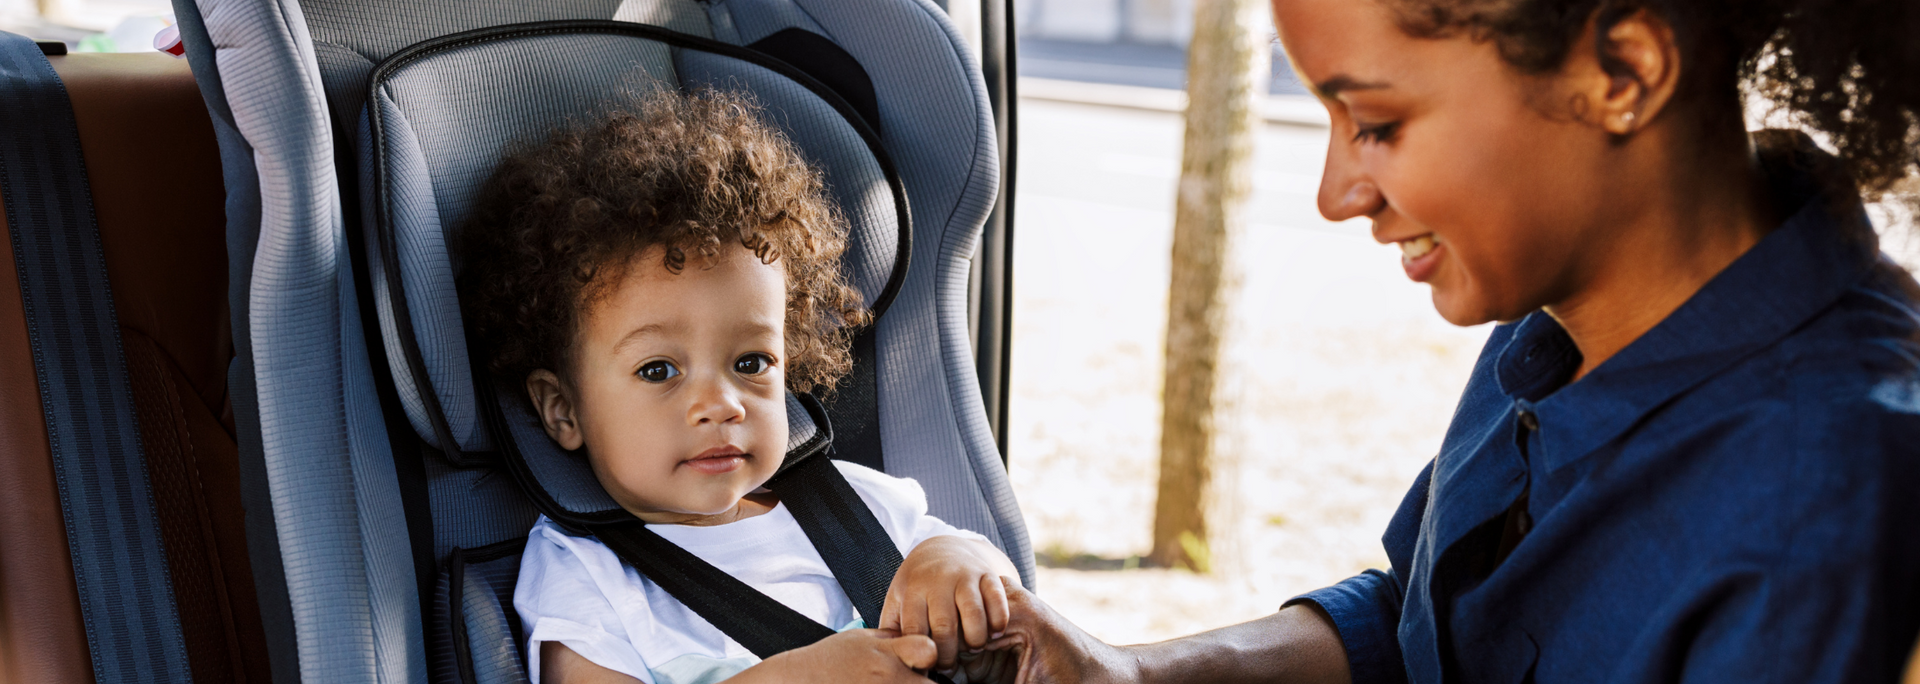 Picture of a child in a child seat in a car.